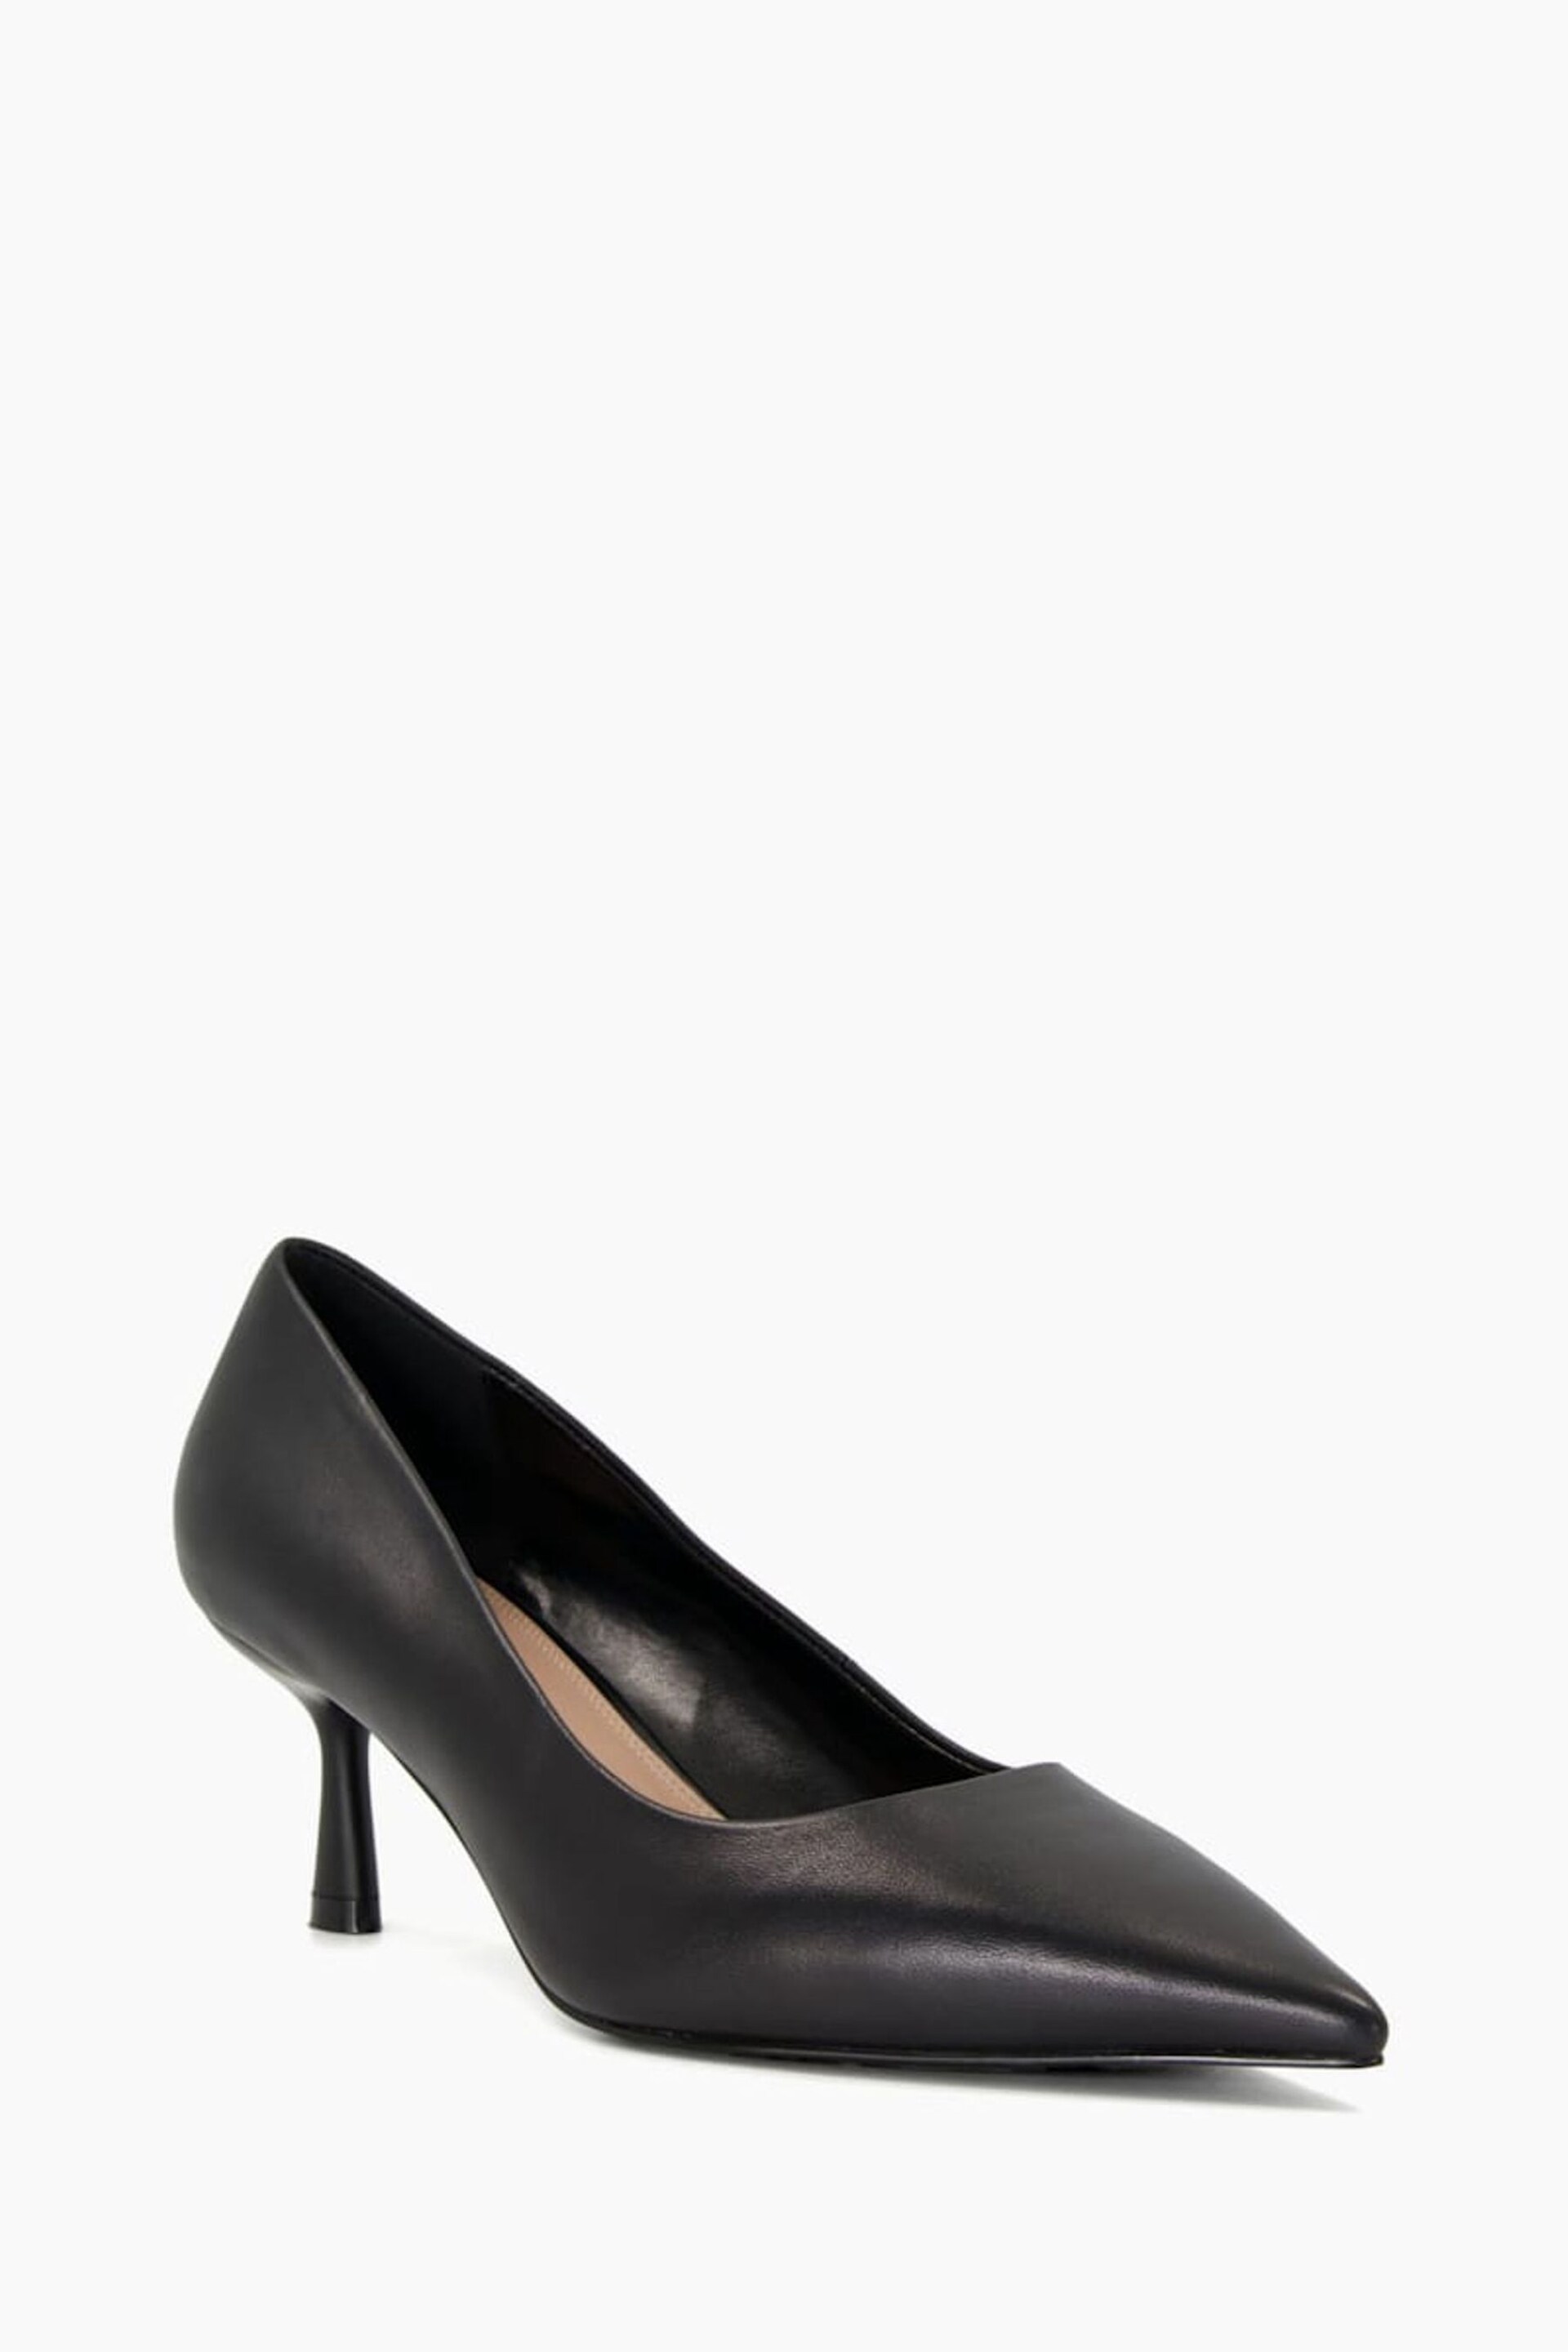 Dune London Black Wide Fit Angelina Mid Heel Spray Courts - Image 2 of 4